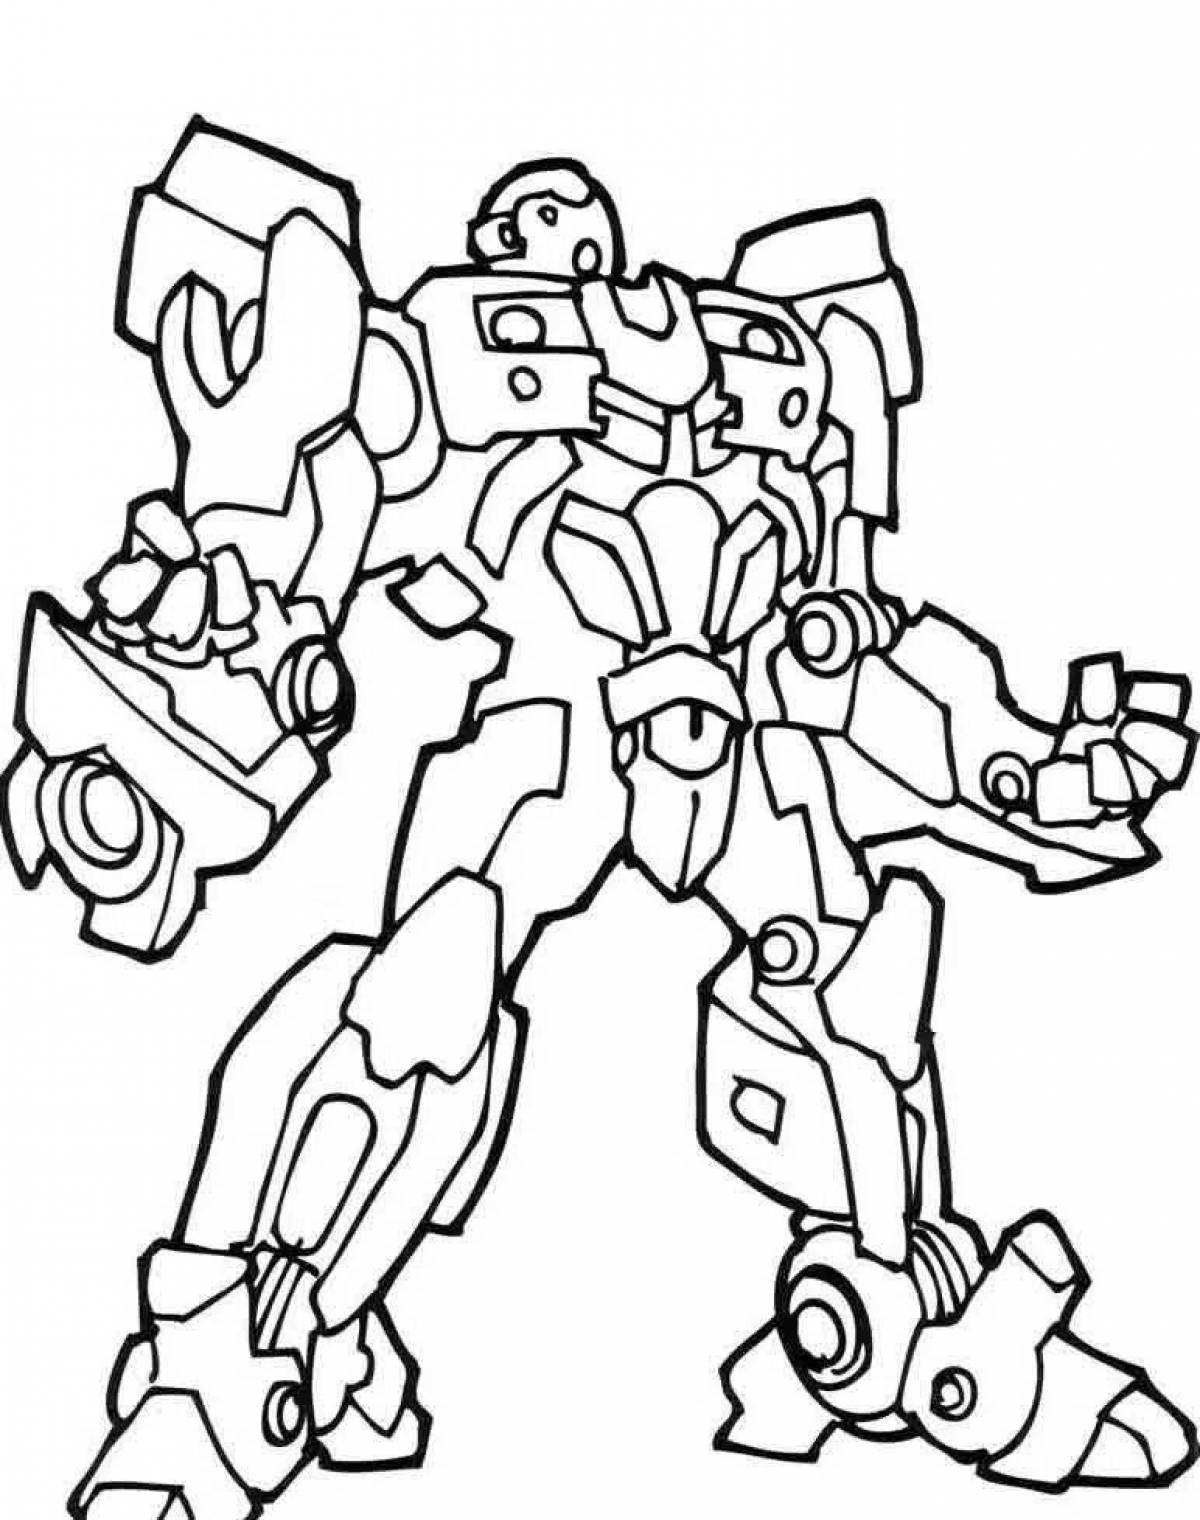 Colored tobots coloring book